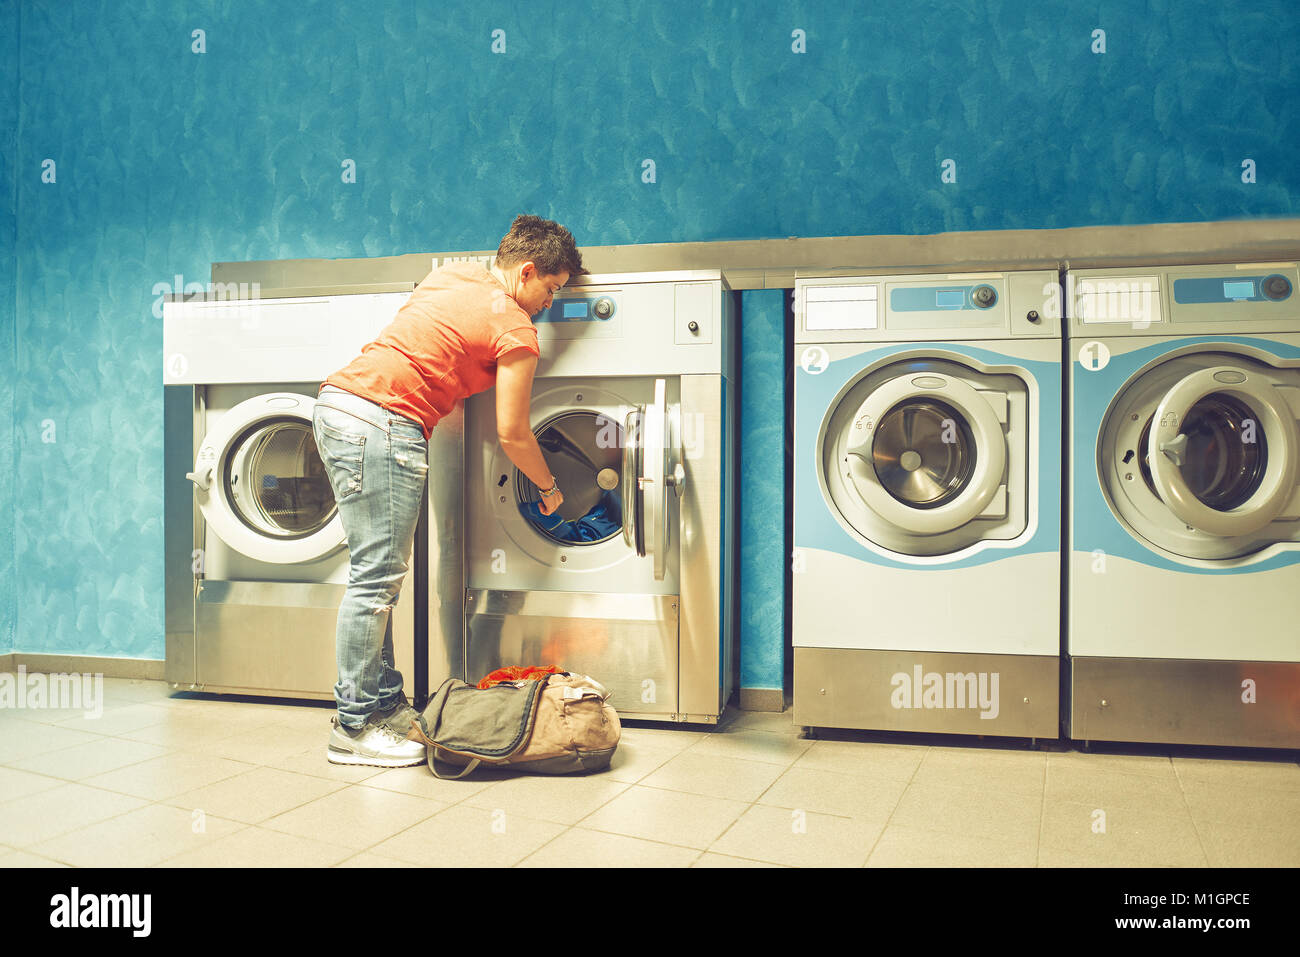 A girl fills up a public automatic washing machines with dirty cloths. Stock Photo